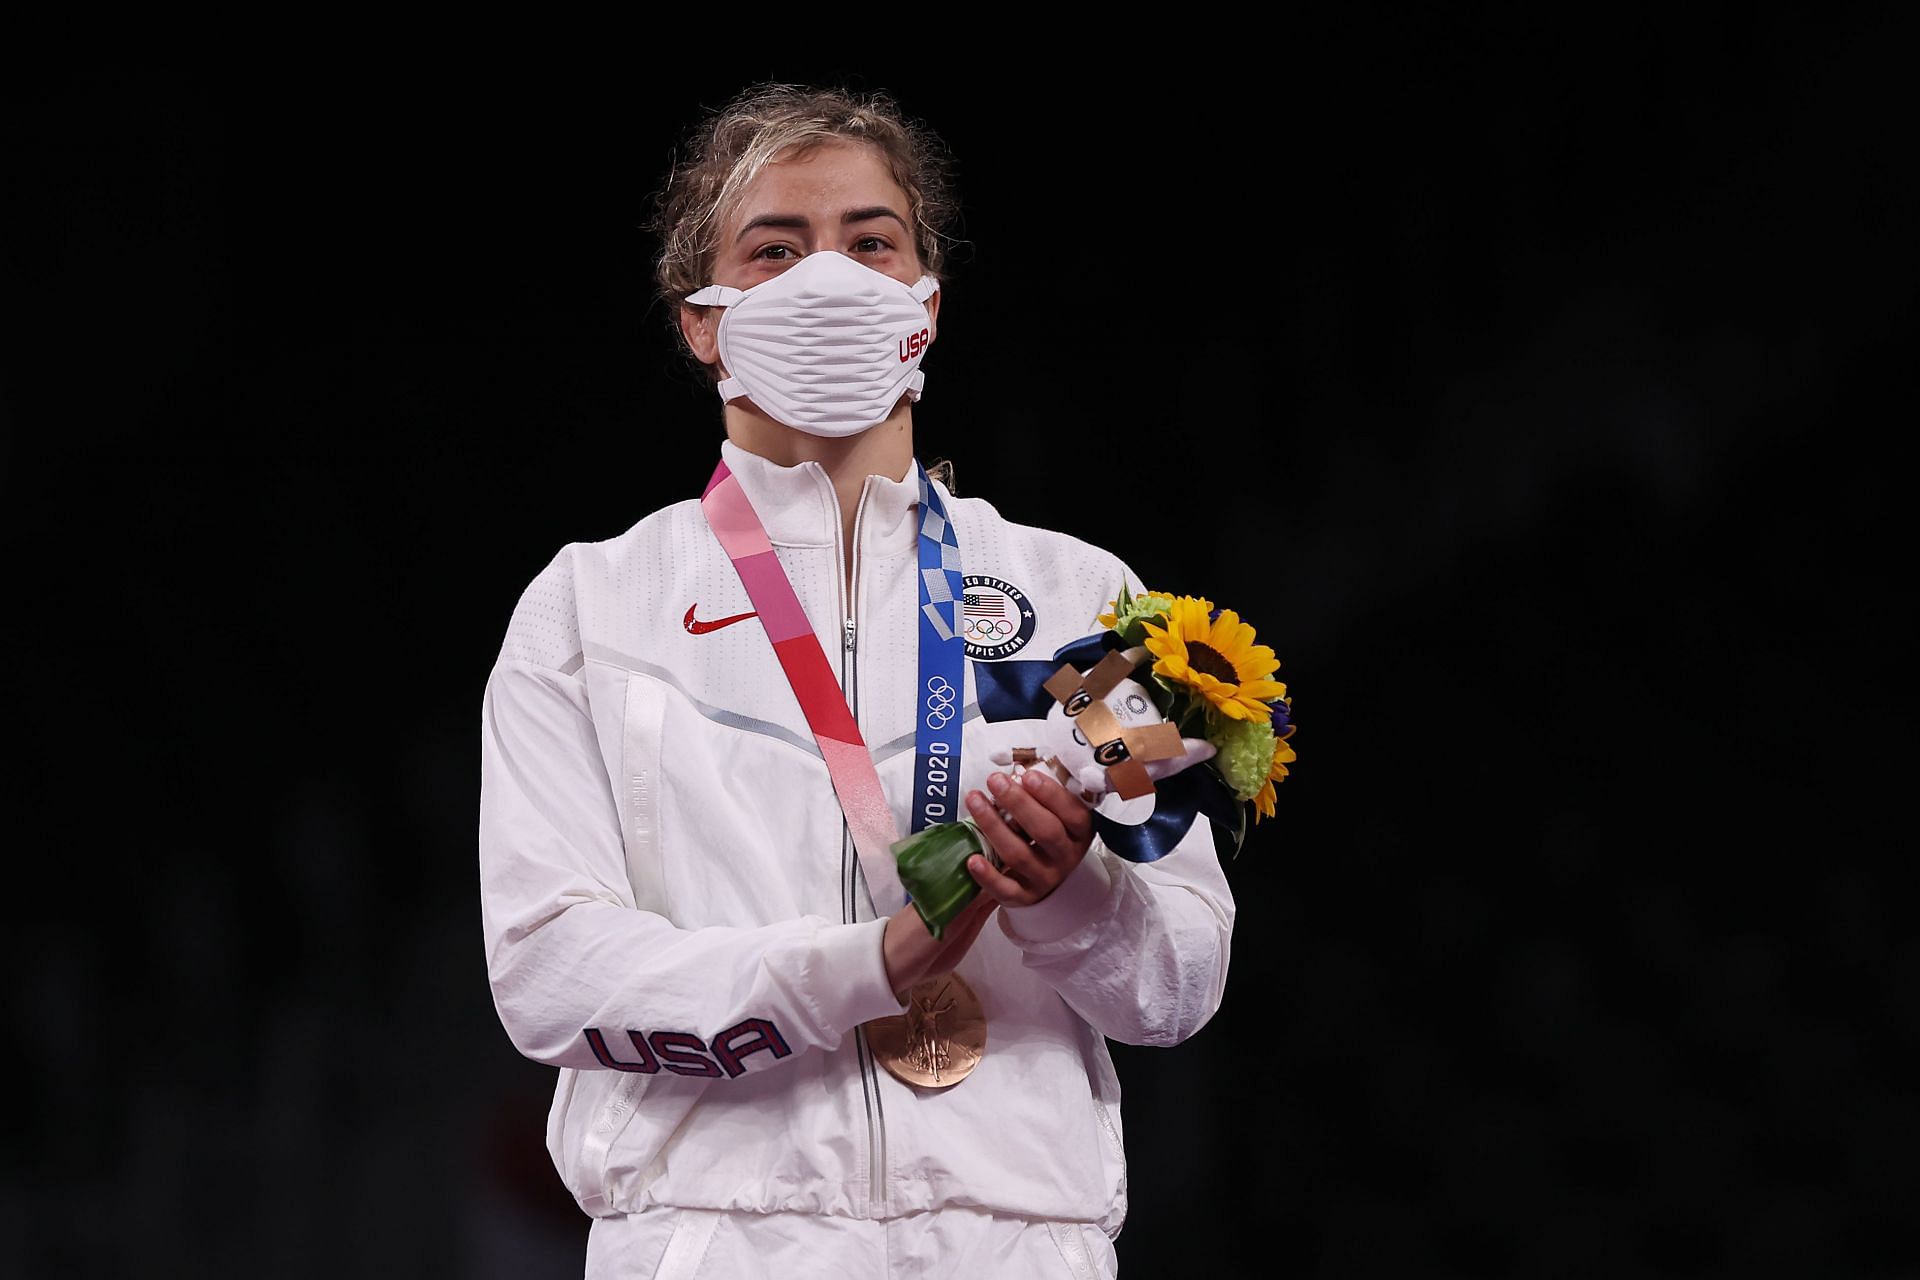 Women&#039;s Freestyle 57kg bronze medalist Helen Louise Maroulis poses with her medal on day thirteen of the Tokyo 2020 Olympic Games at Makuhari Messe Hall on August 05, 2021, in Chiba, Japan. (Photo by Maddie Meyer/Getty Images)